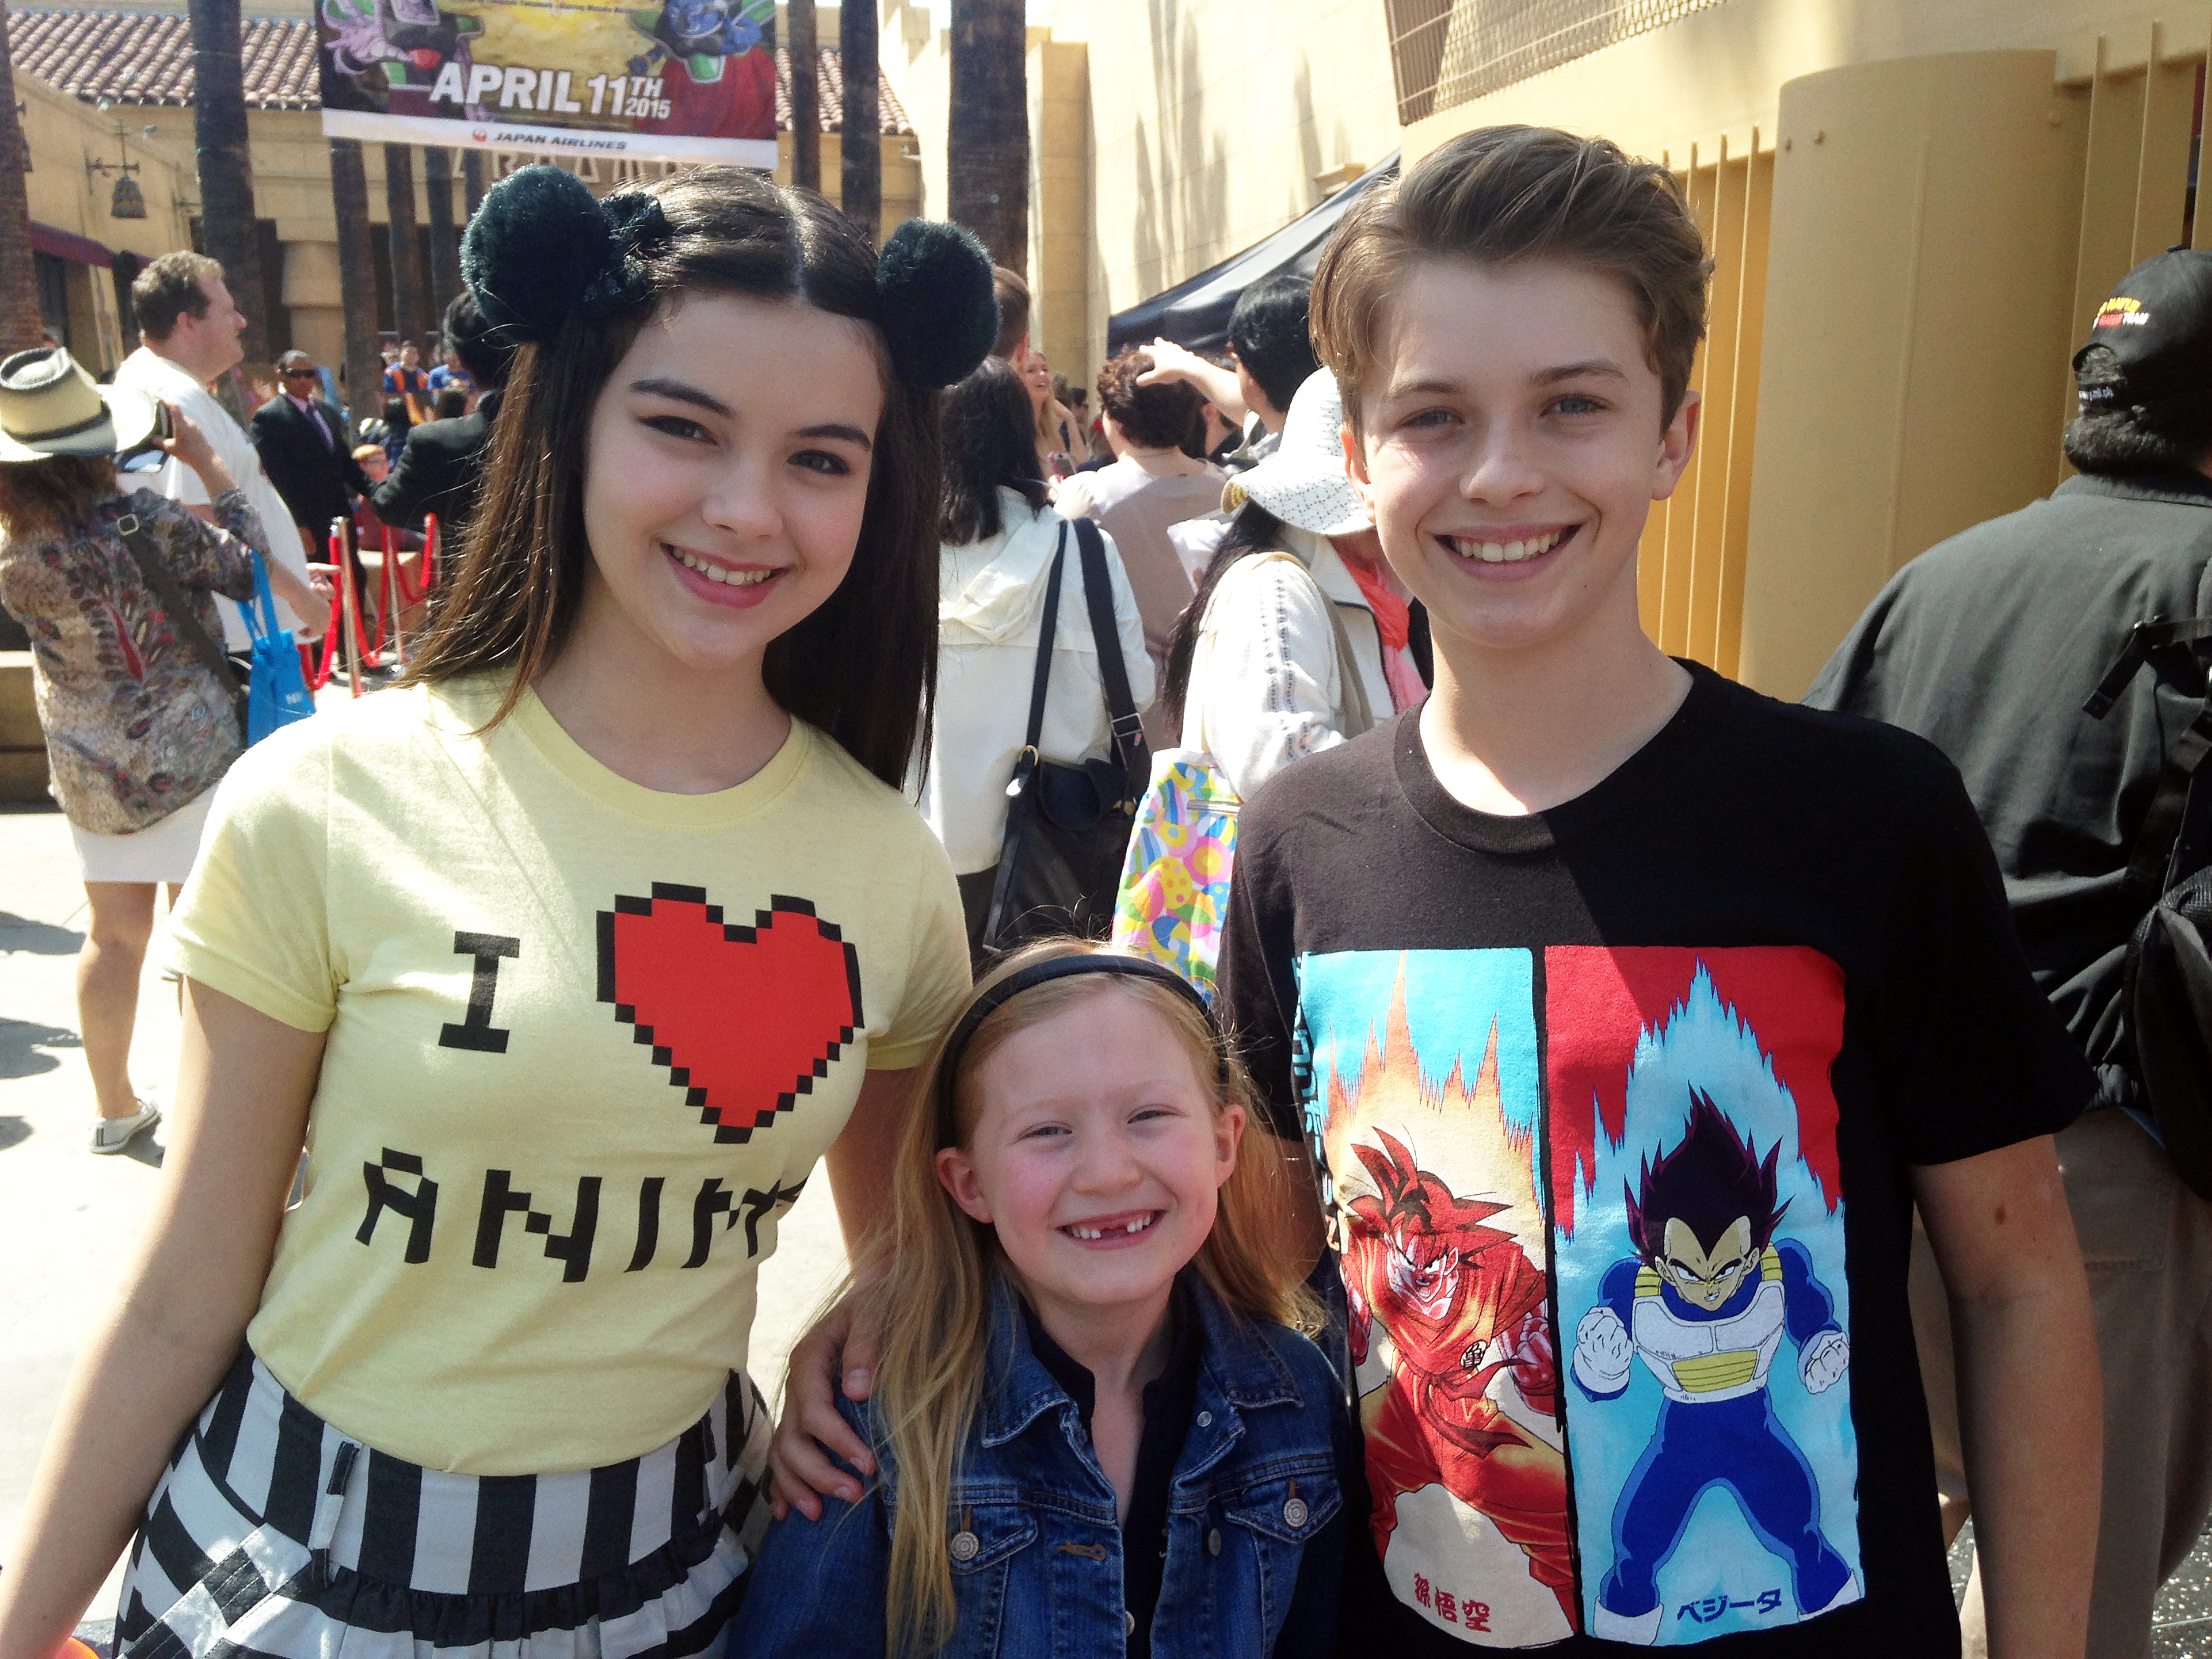 Abigail Zoe Lewis arrives,Merit Leighton and Jacob Hopkins at Premiere Of 'Dragon Ball Z: Resurrection 'F' held at the Egyptian Theatre on April 11, 2015 in Hollywood, California.